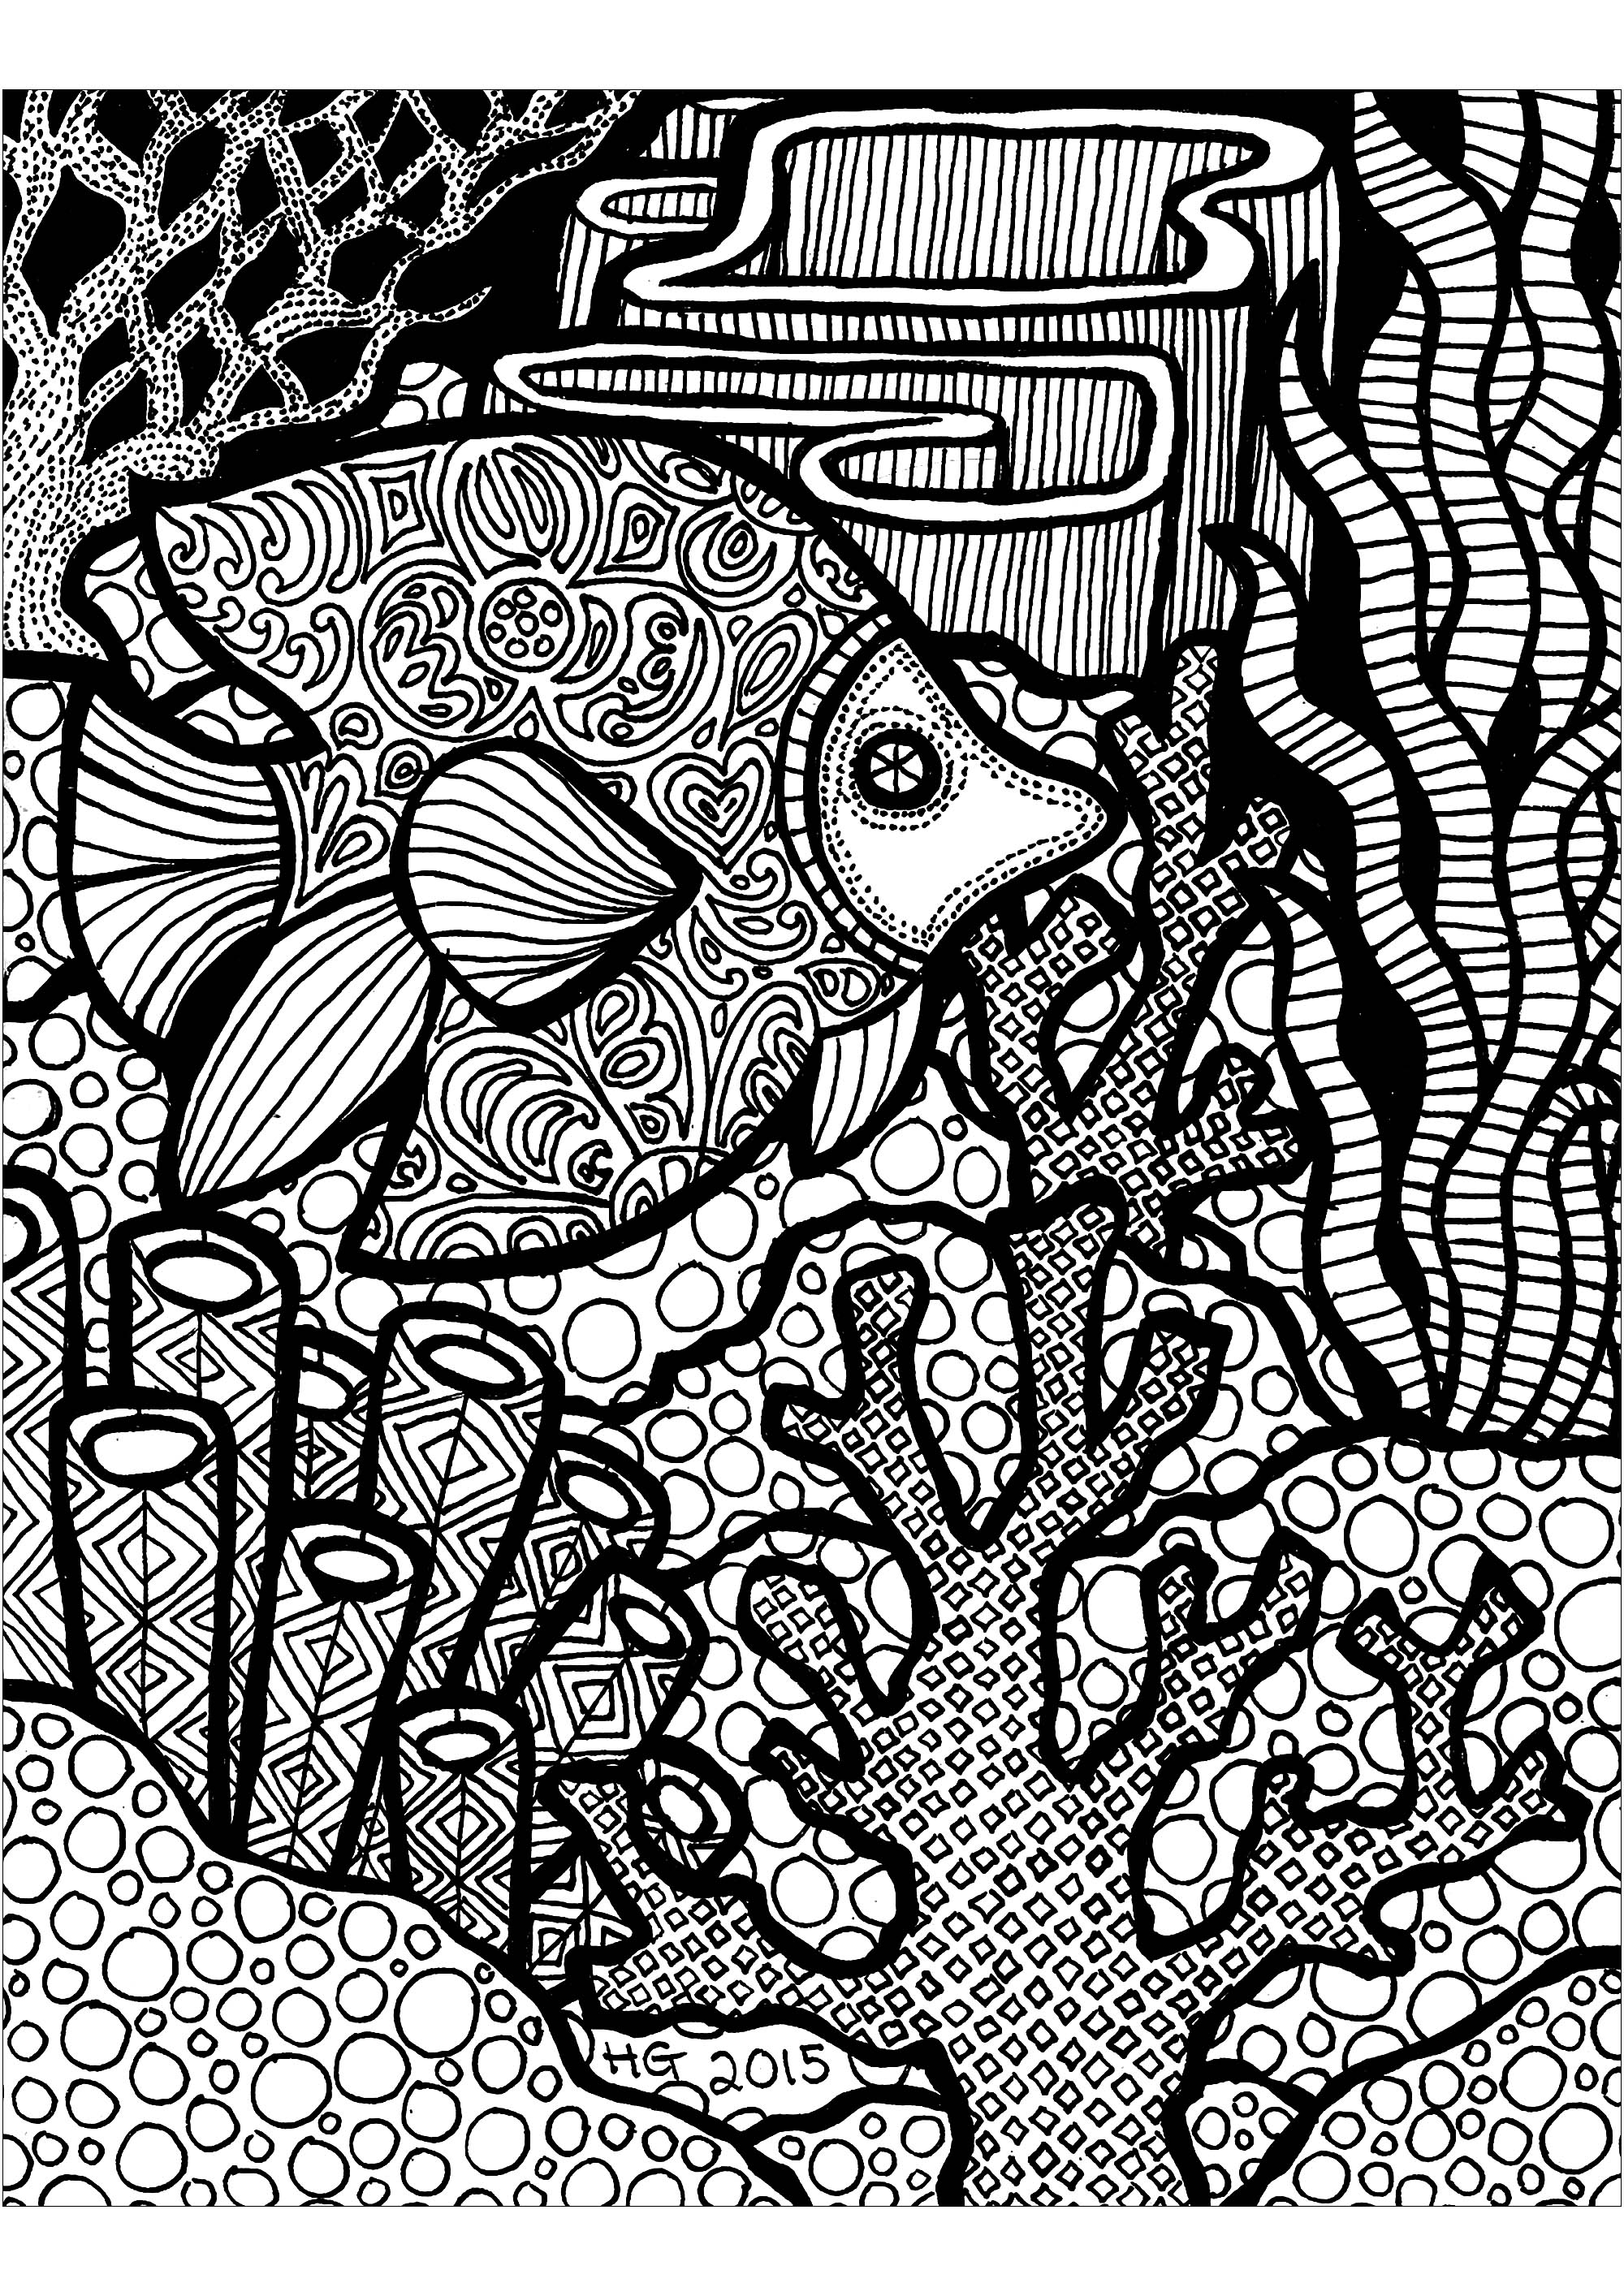 This beautiful fish protects its corals!, Artist : HGCreative. Arts